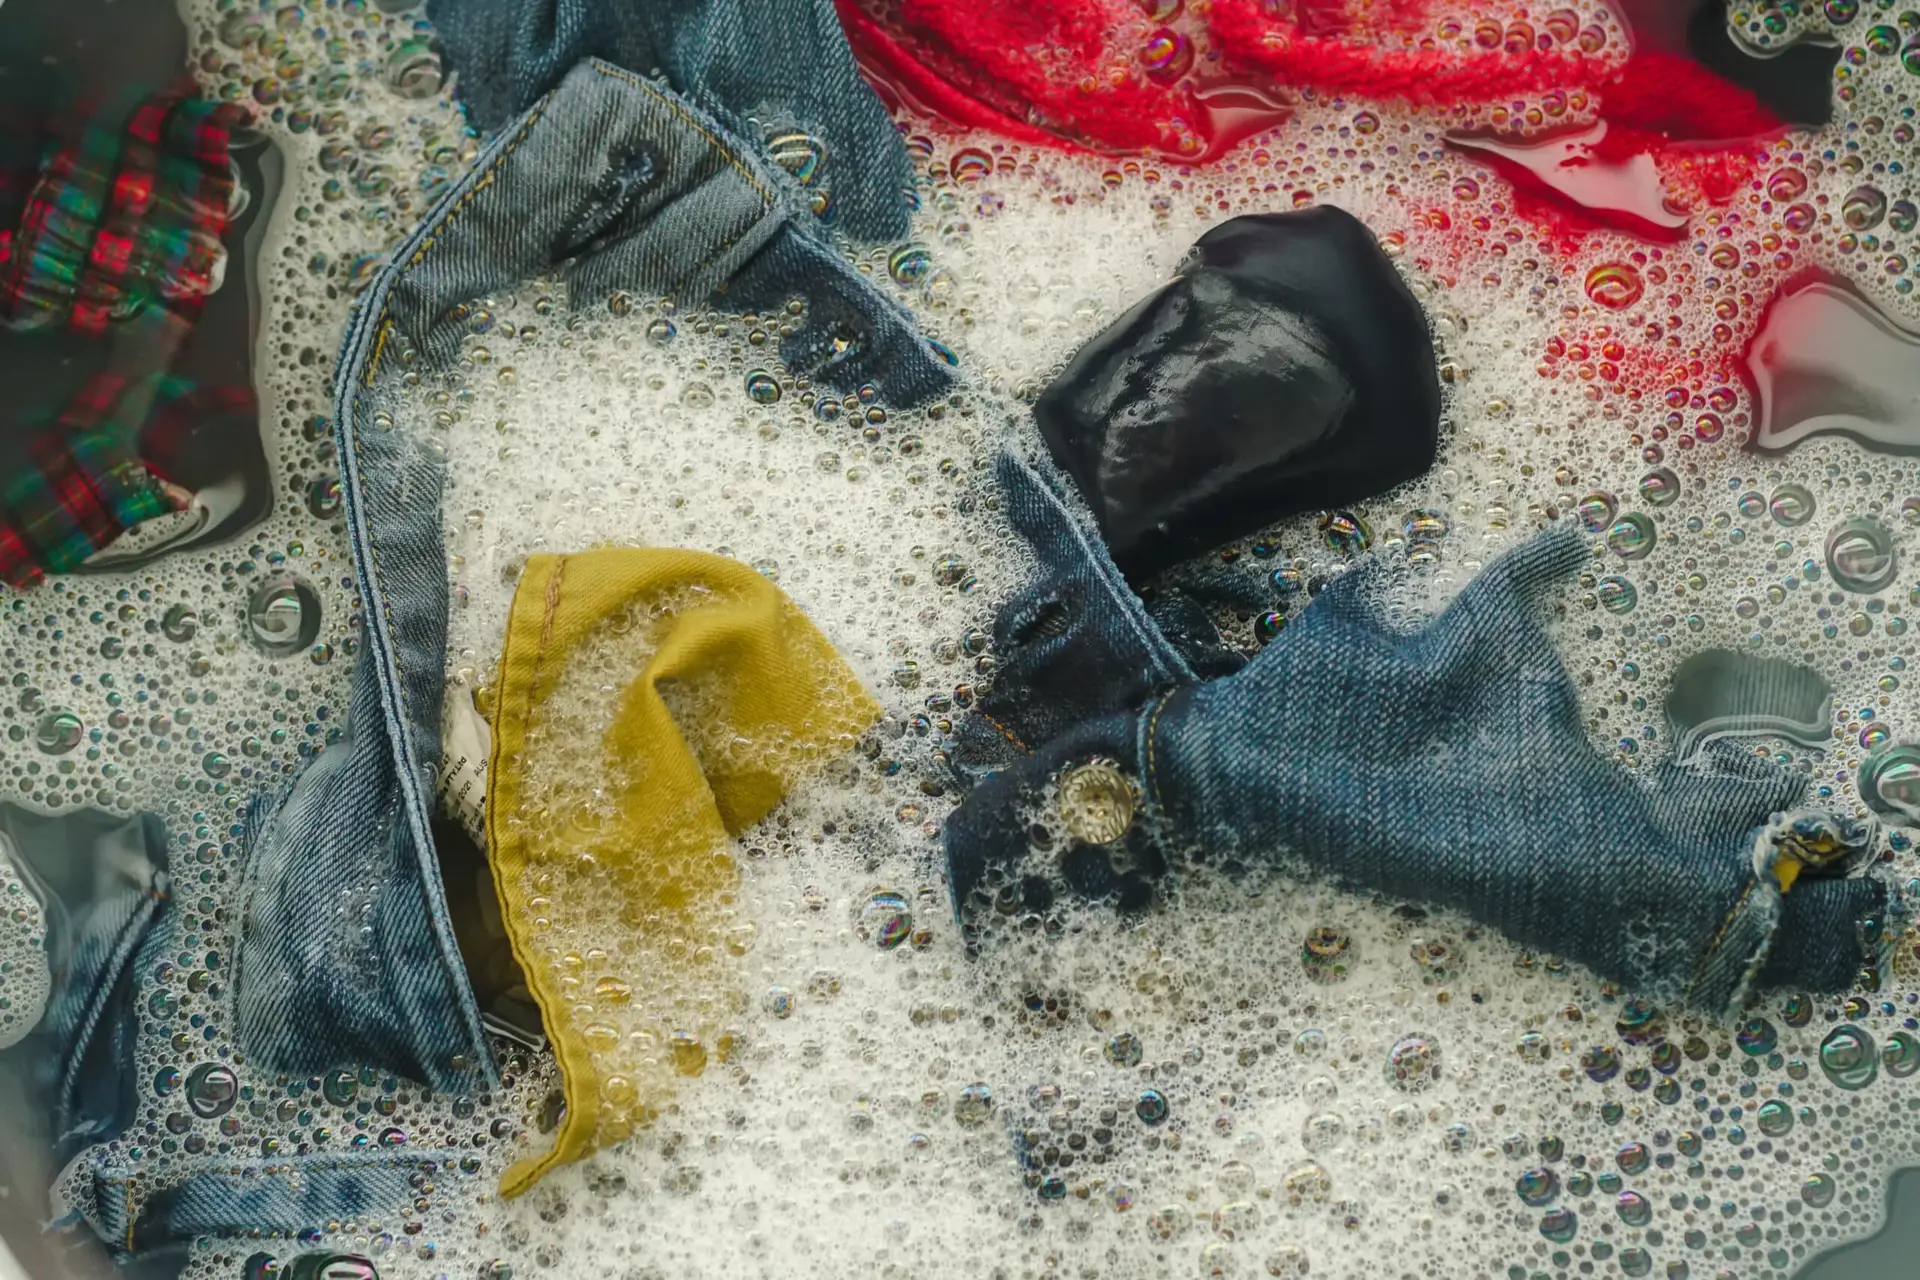 clothes in a basin of soapy water